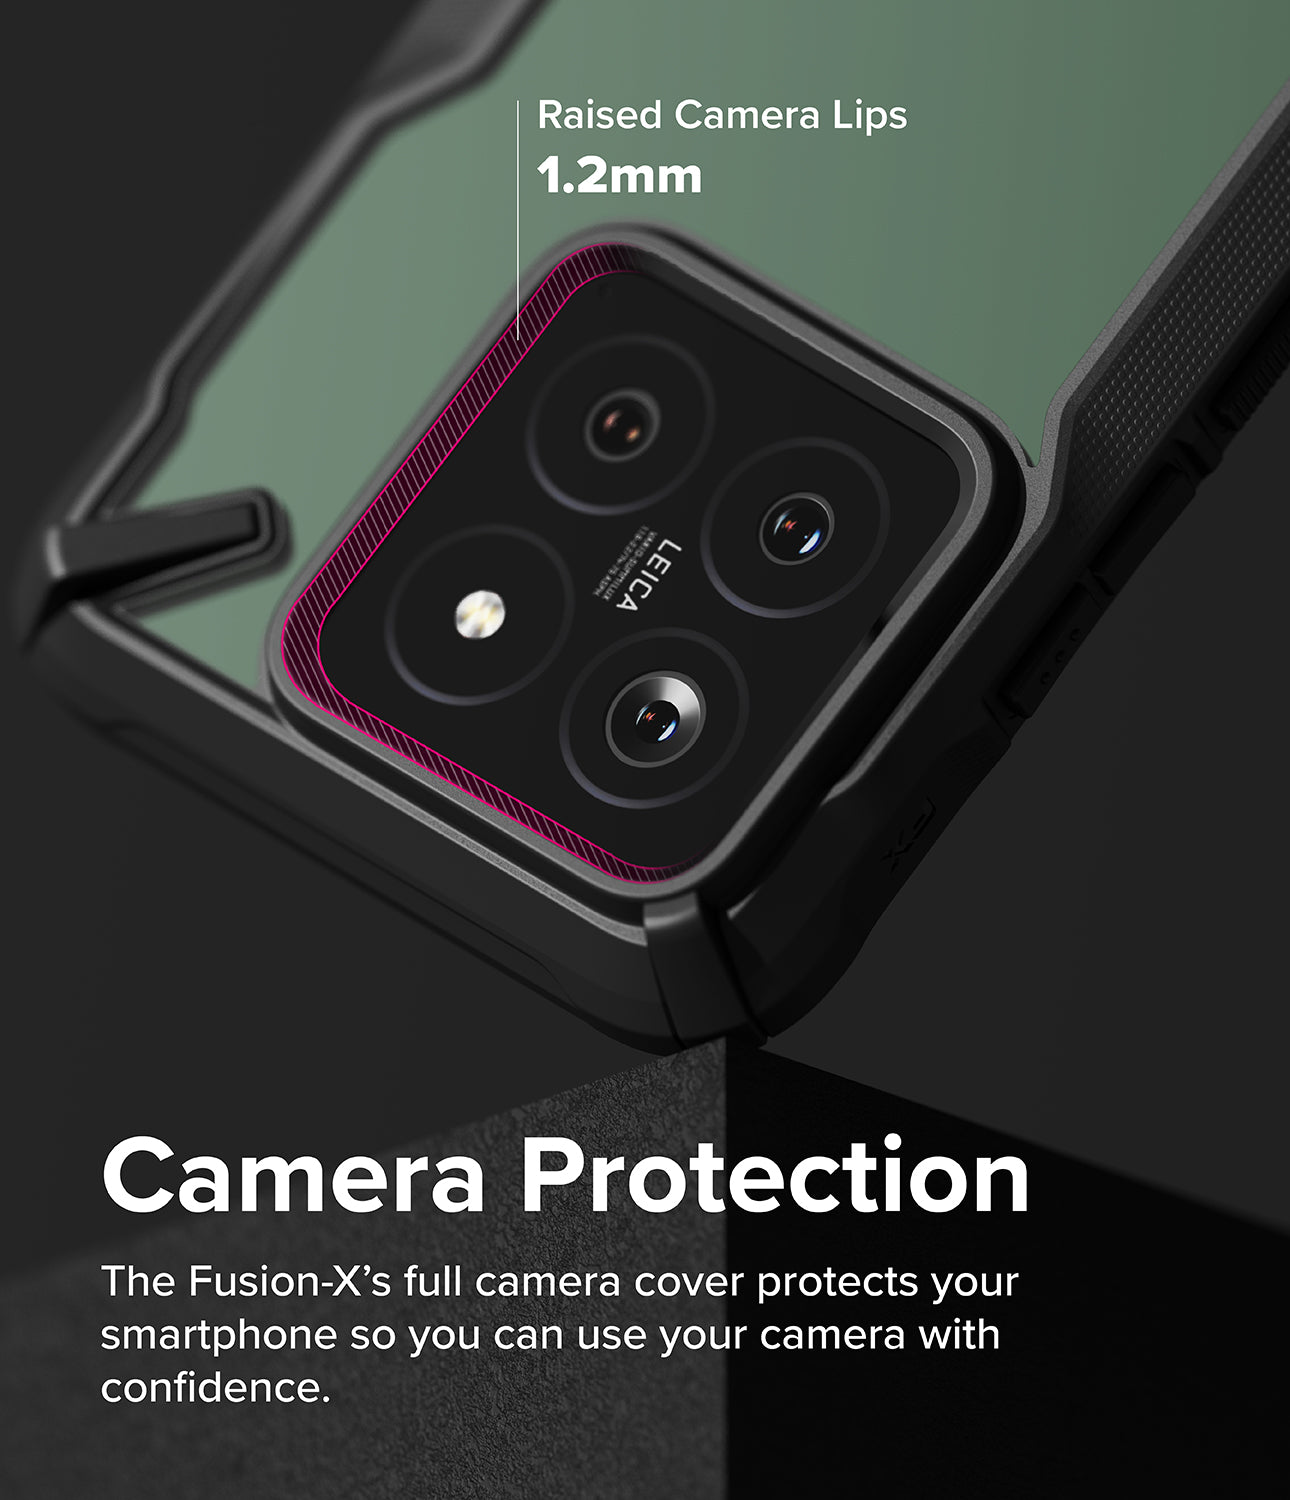 Xiaomi 14 Case | Fusion-X - Black - Camera Protection. The Fusion-X's full camera cover protects your smartphone so you can use your camera with confidence.